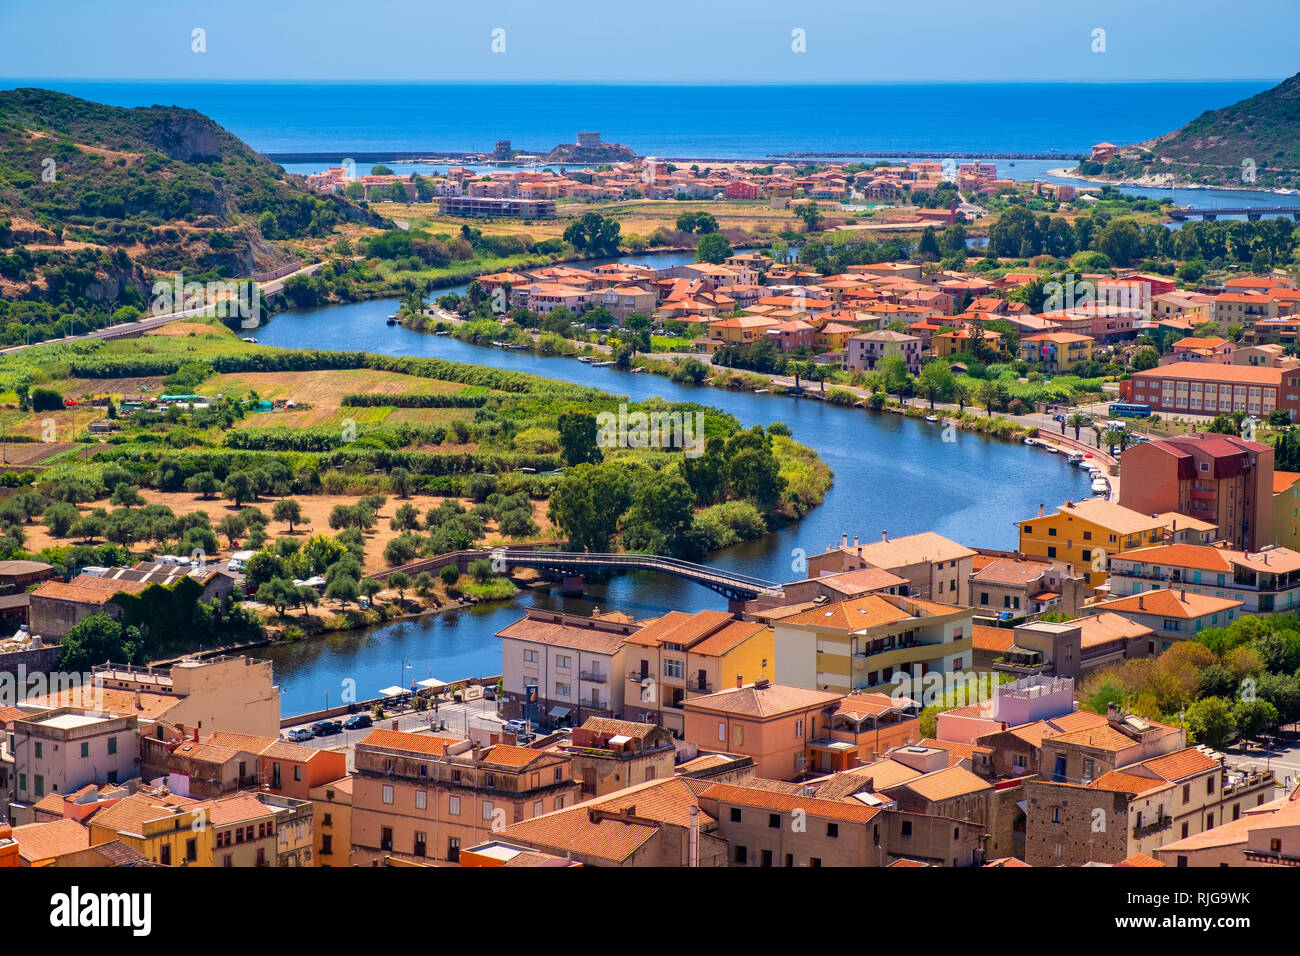 Bosa Sardinia Italy 18 08 13 Panoramic View Of The Town Of Bosa By The Temo River With Bosa Marina Resort At The Mediterranean Sea Coast Stock Photo Alamy